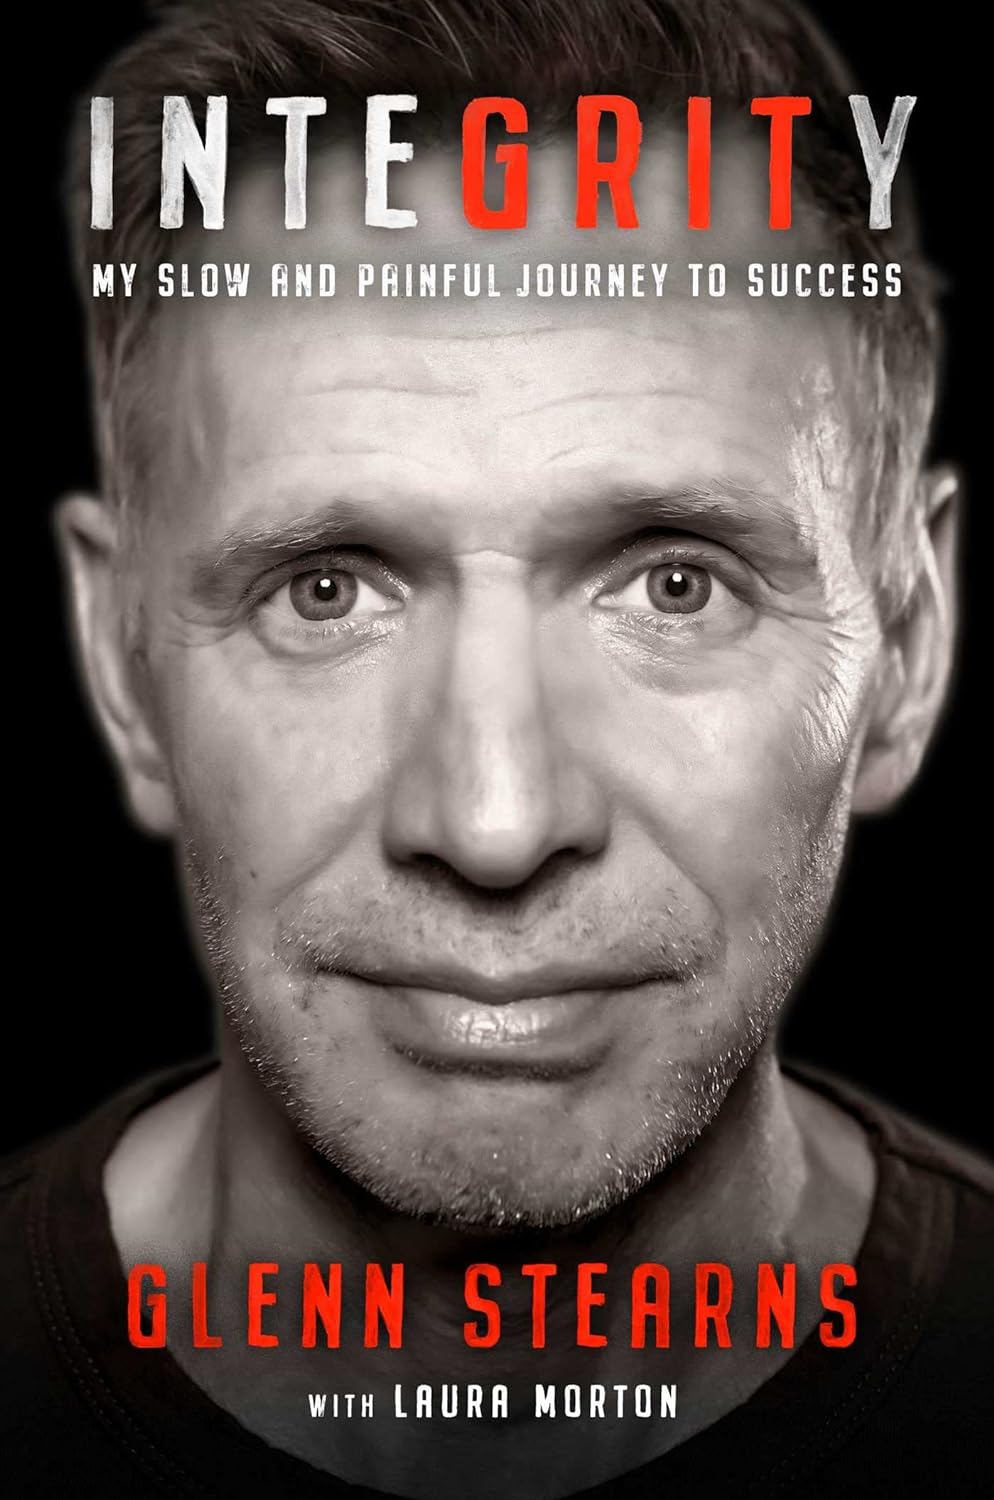 InteGRITy: My Slow and Painful Journey to Success by Glenn Stearns